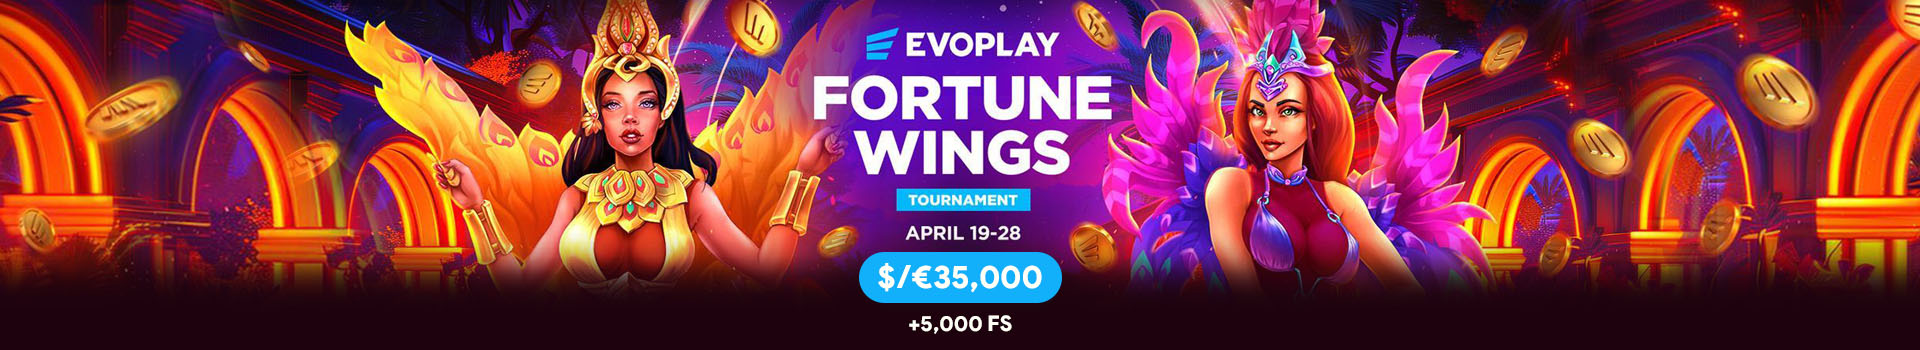 Evoplay Tourney Banner